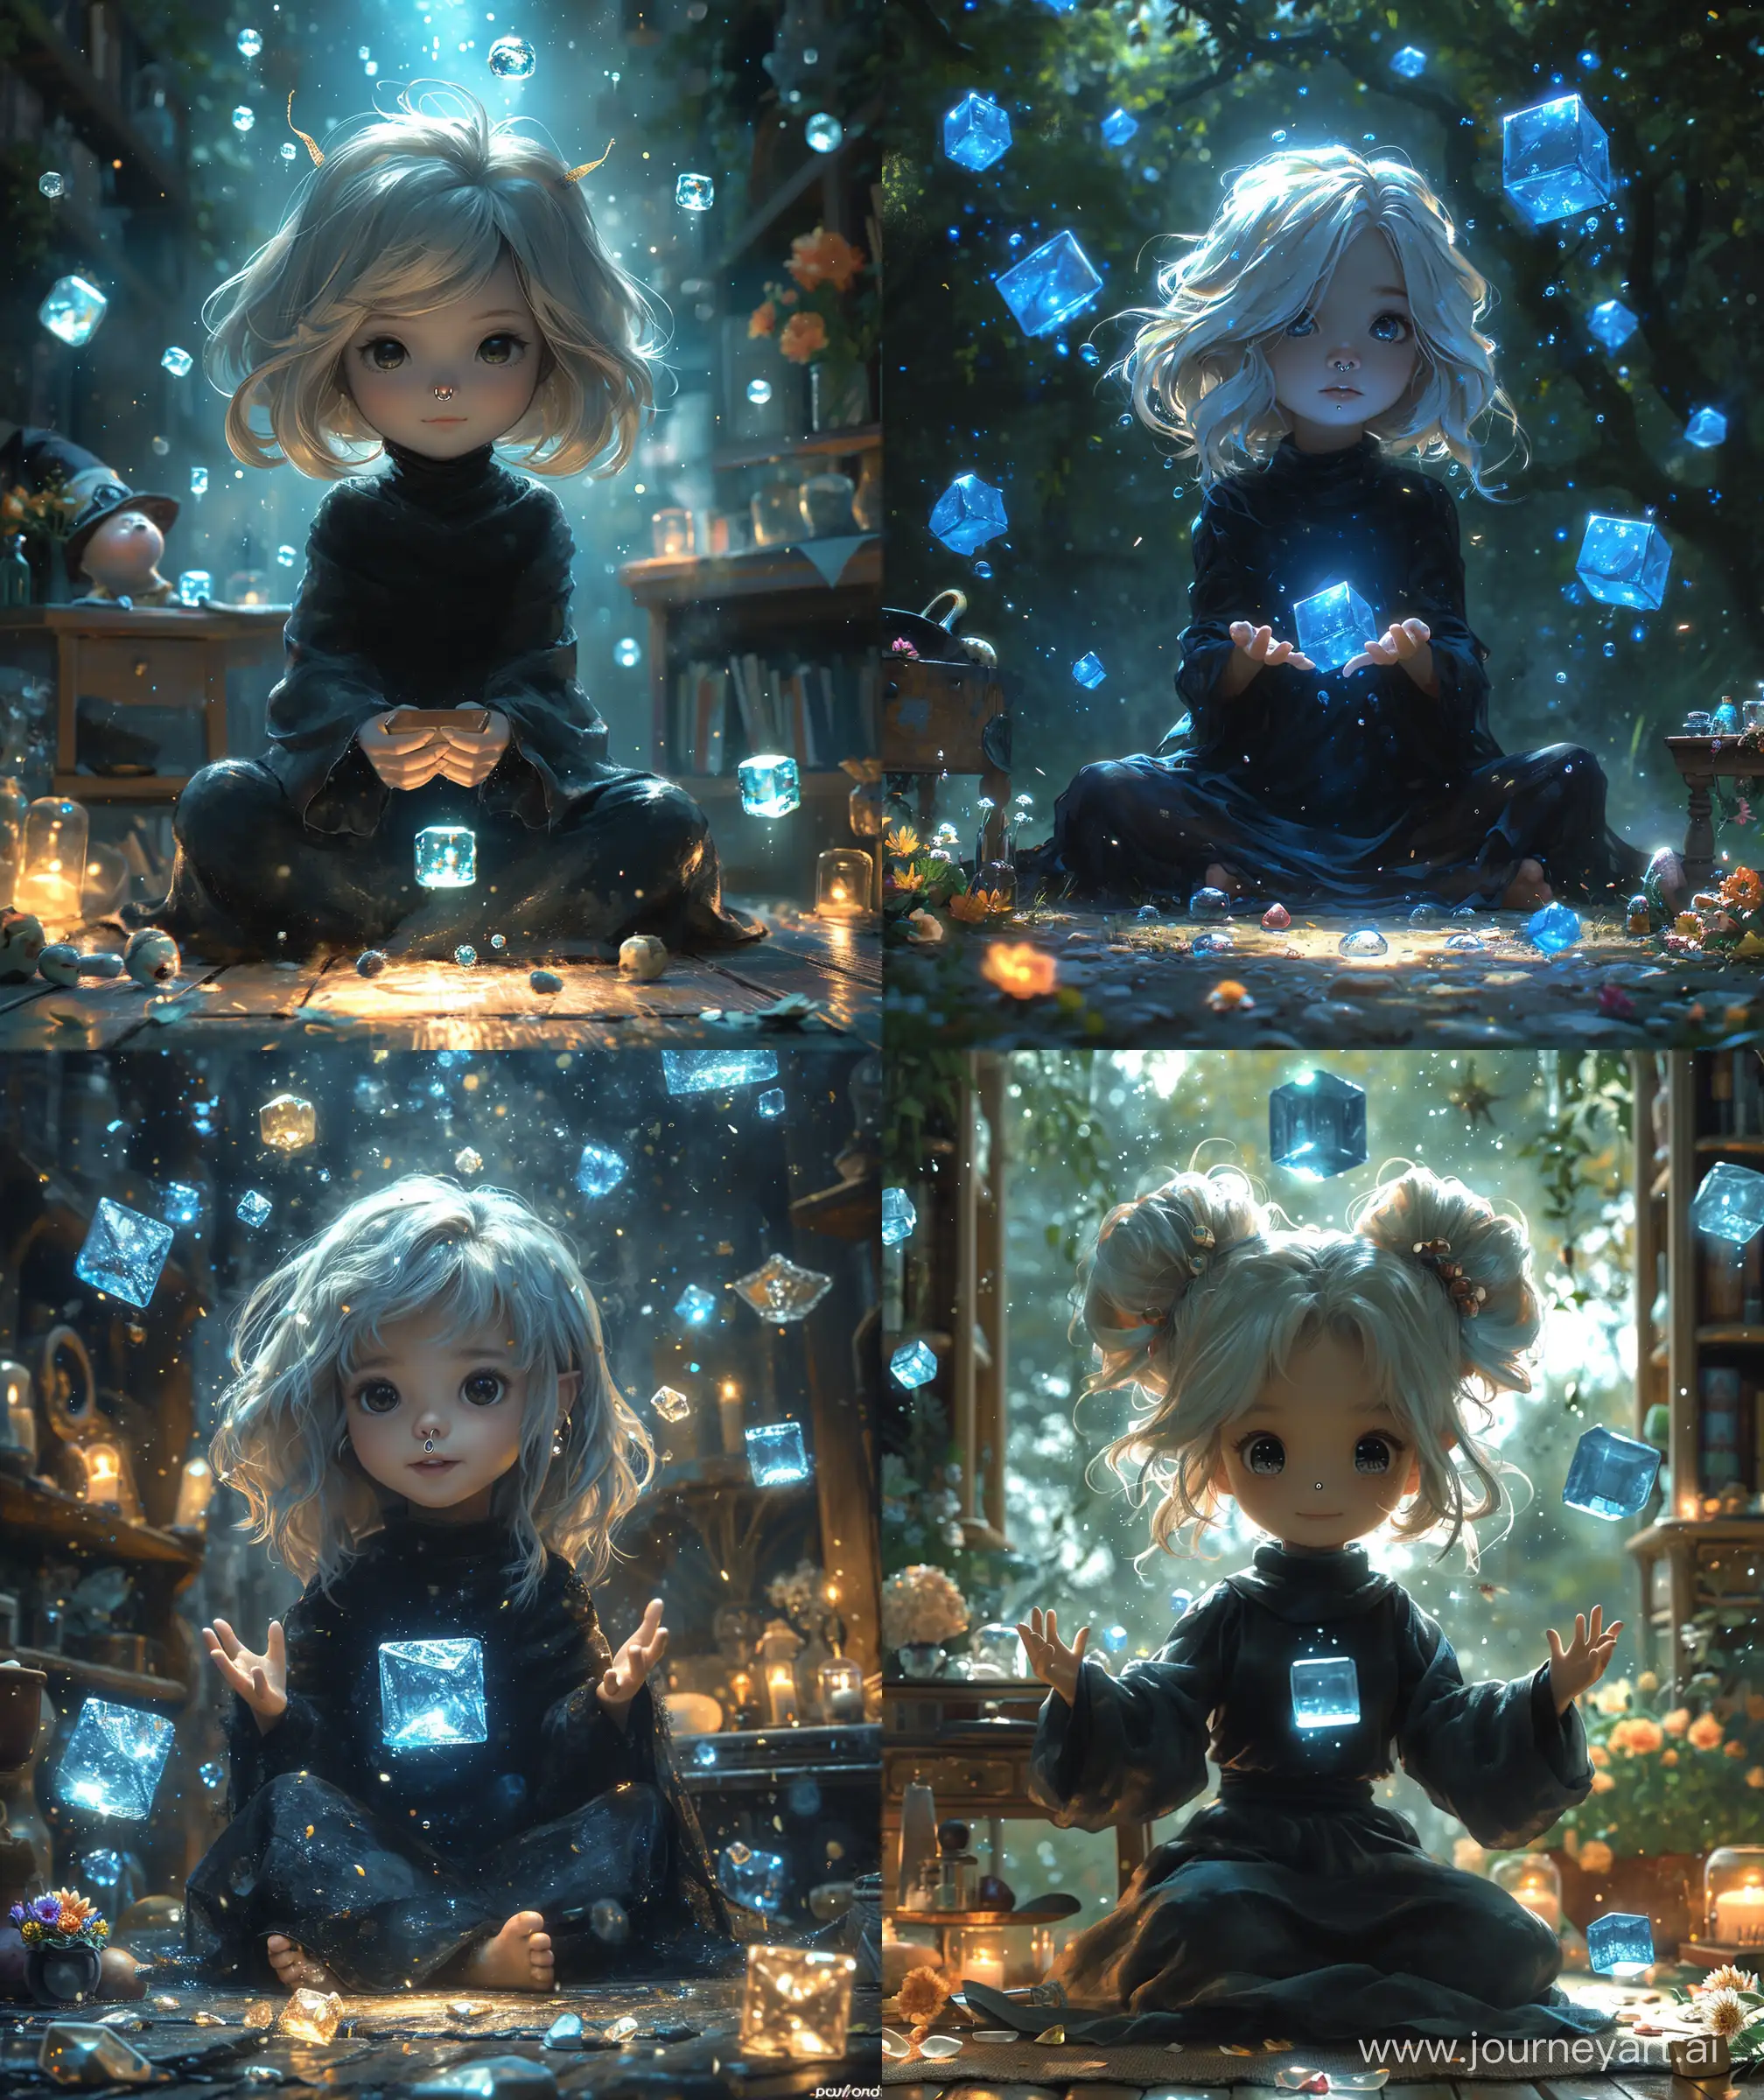 Cristal background, sparkle blue cute floating in air, wearing black gown, fully covered gown,laminating light, glossy upper body, nose ring , light color hair, playing with floating cubes, sitting on ground, royal mage, magic, doll face, witch hat, gems and flower around potion desk, piggy tail hair , cute and curious , --ar 27:32 --v 6.0 --s 750.